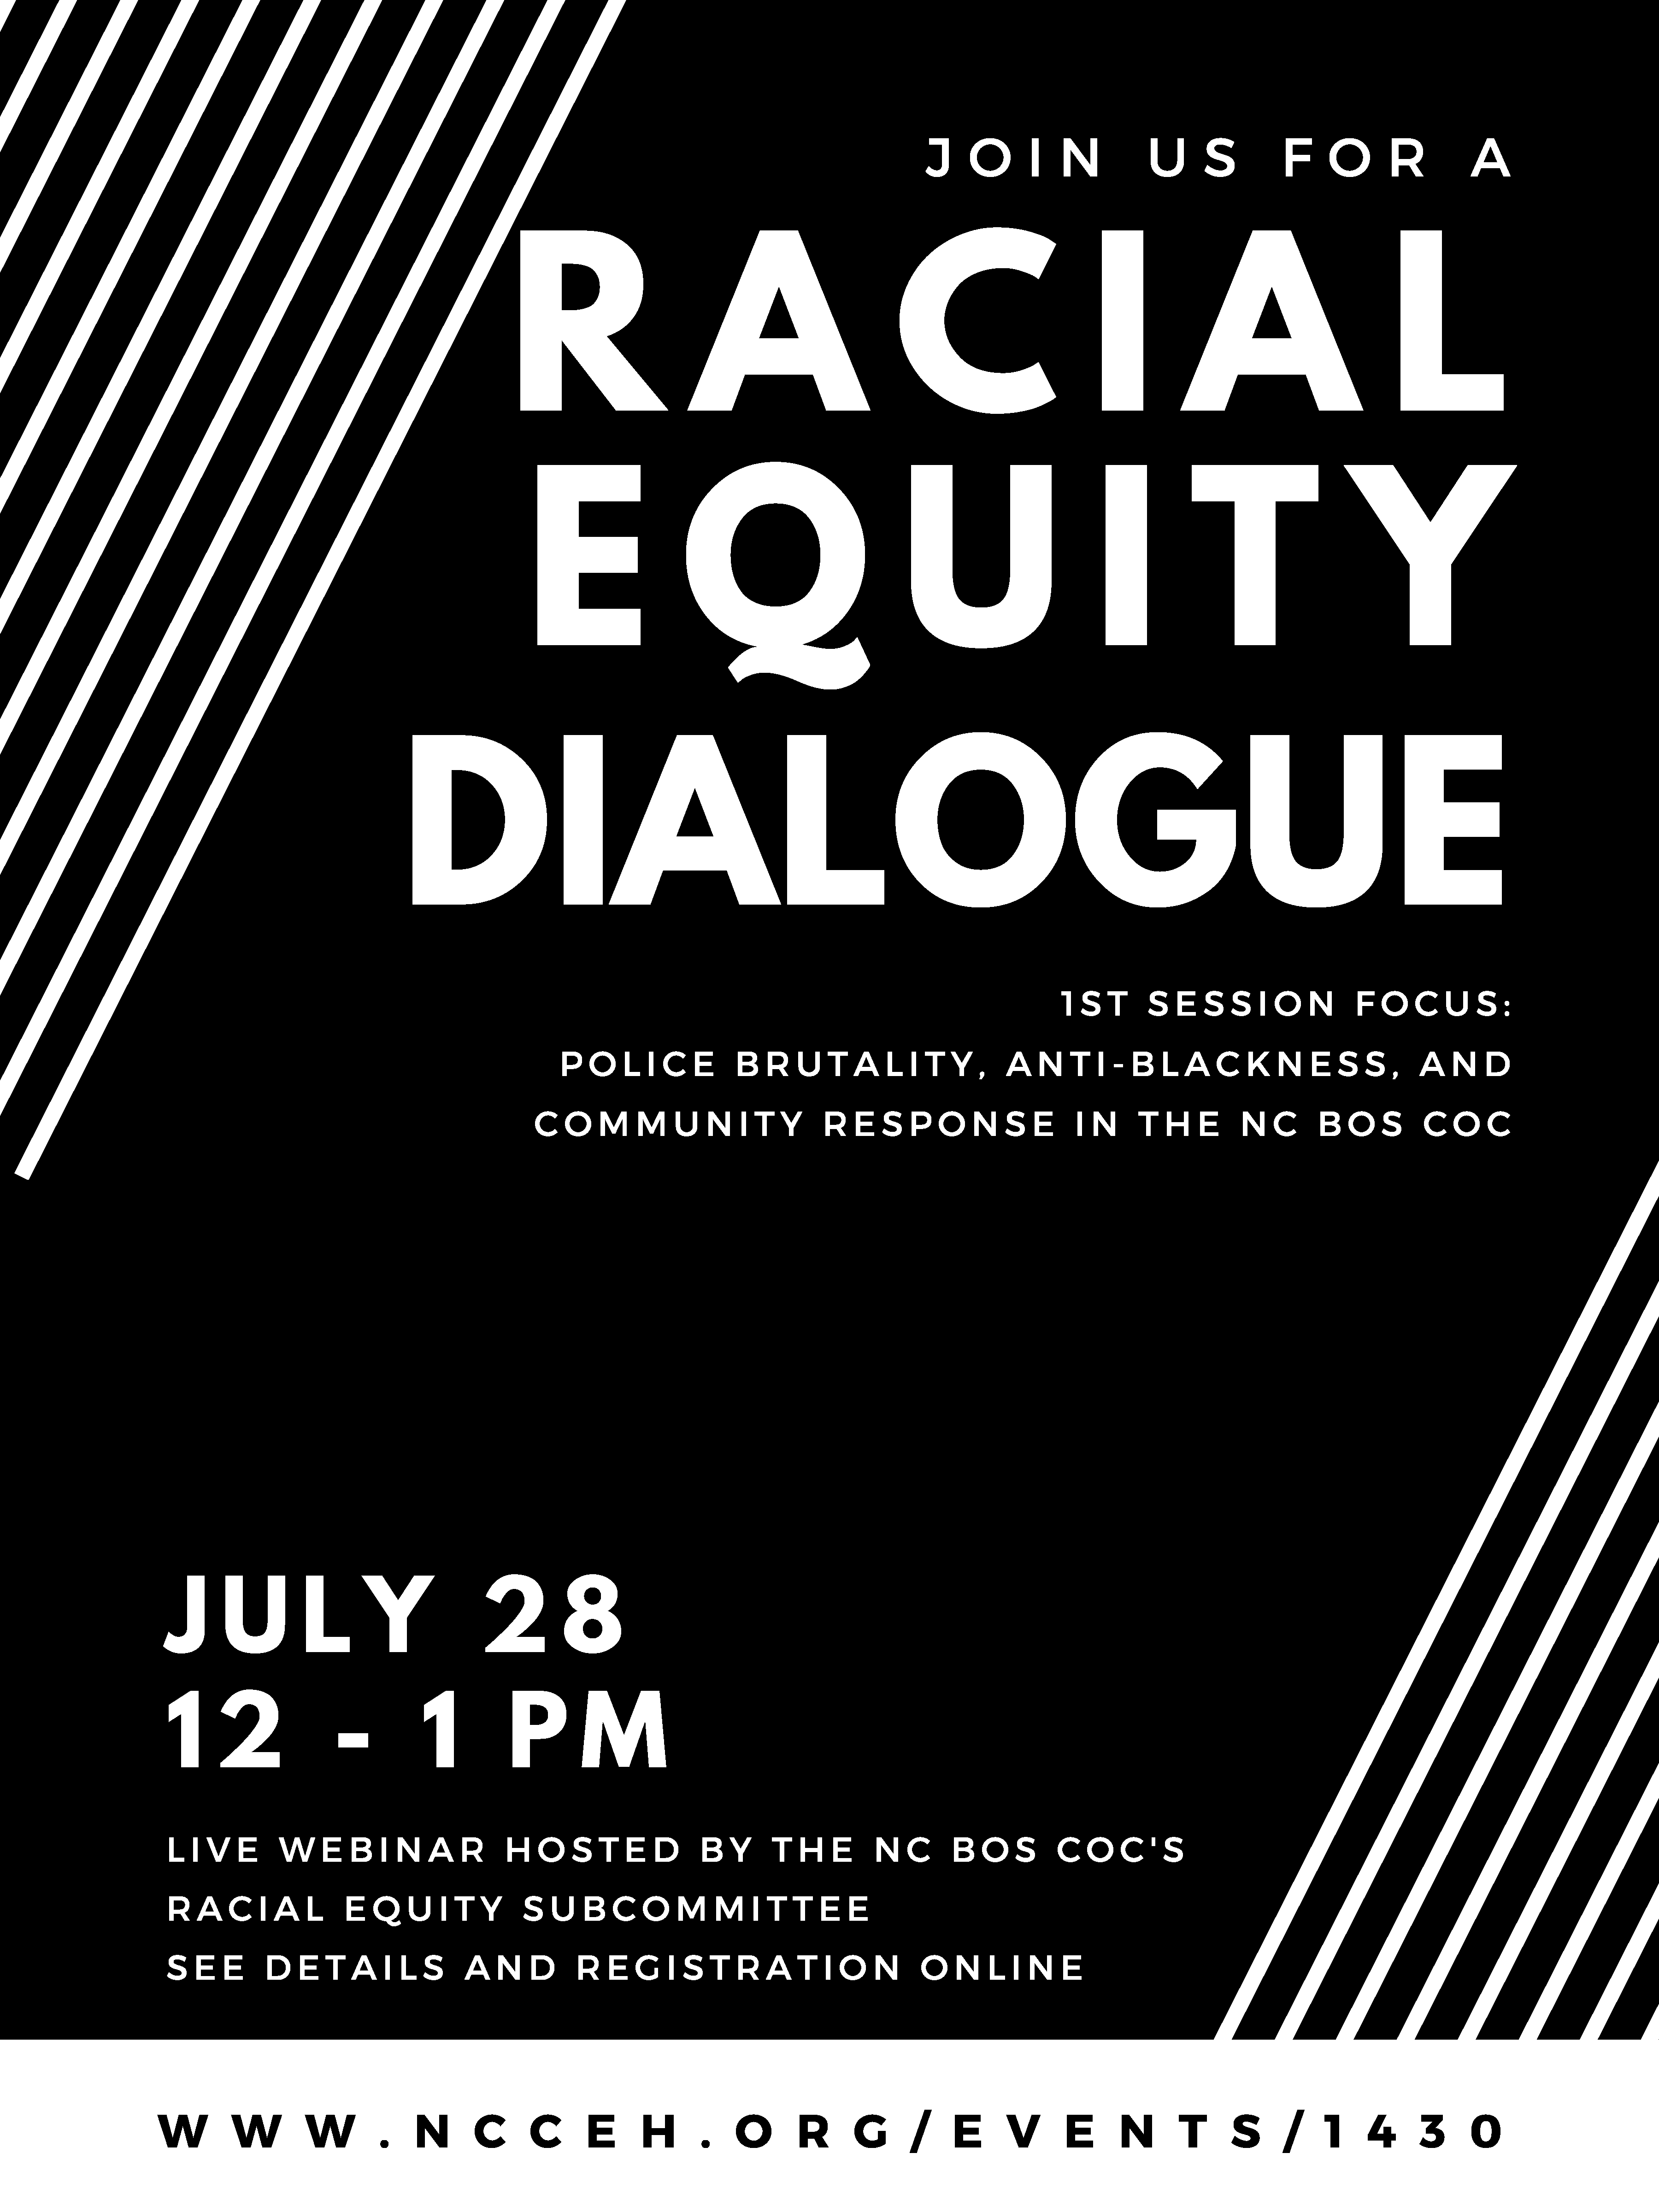 Racial Equity Dialogue Session